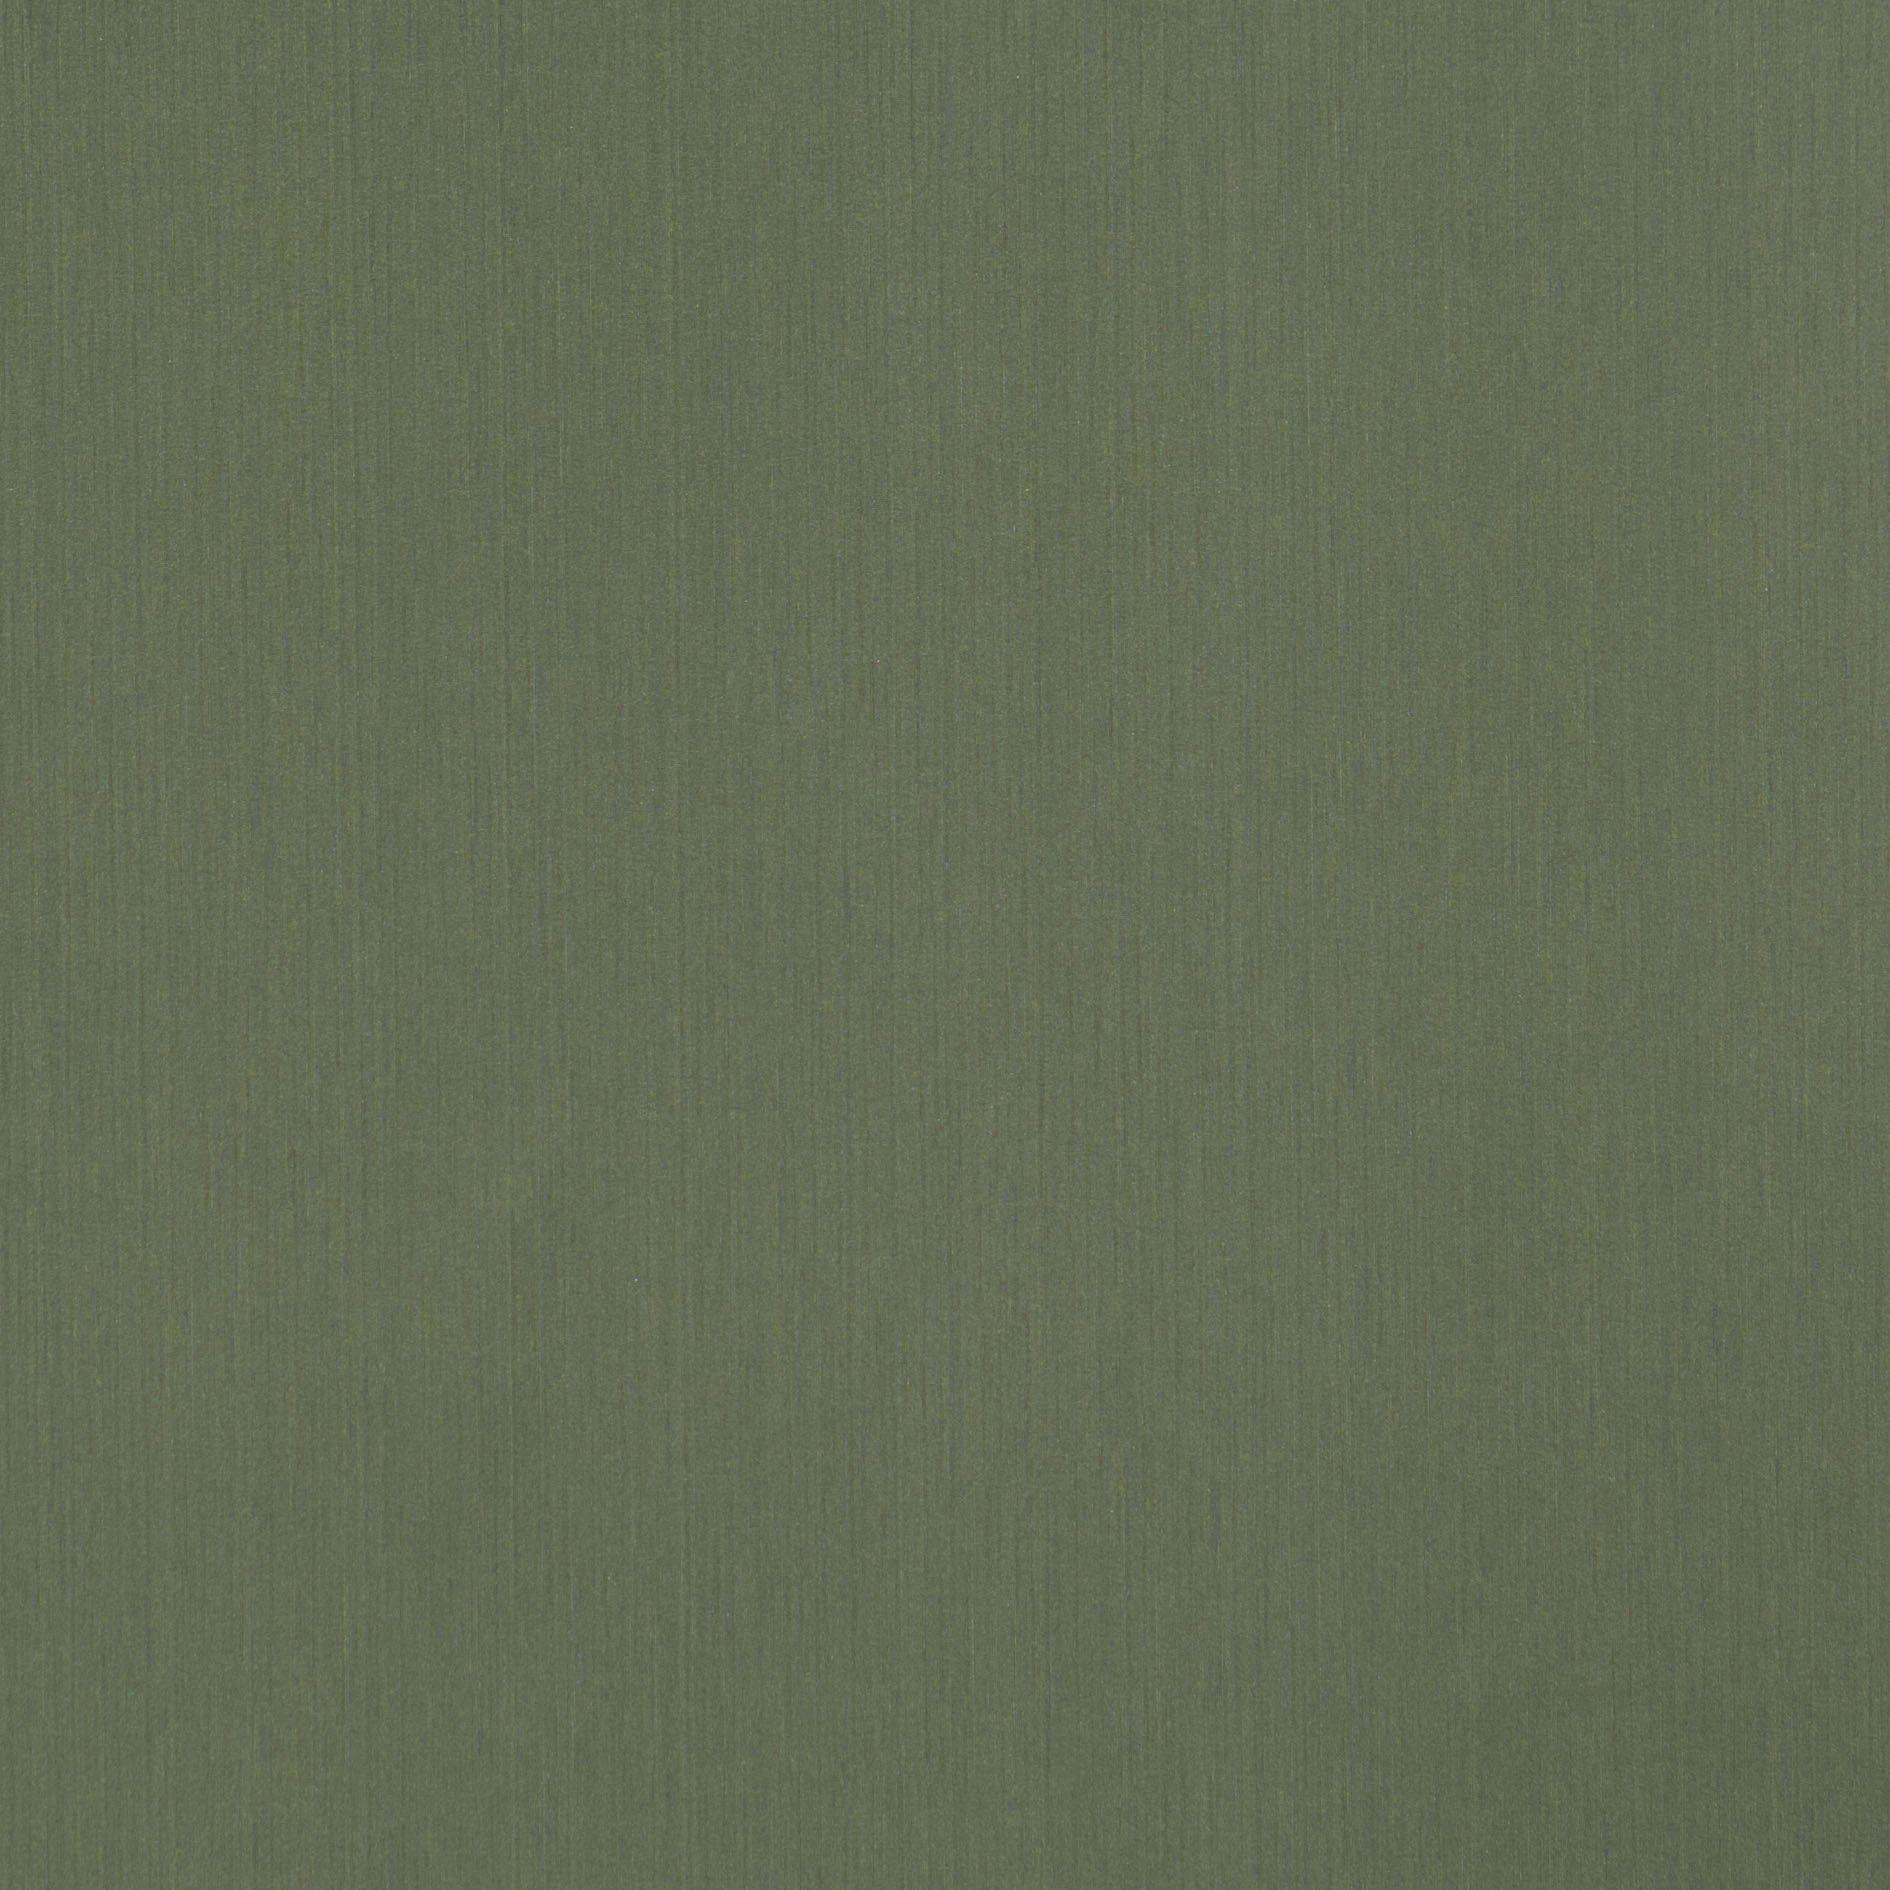 28. St. Patrick's Day Wallpaper: Our Top Picks for Green Wallpaper